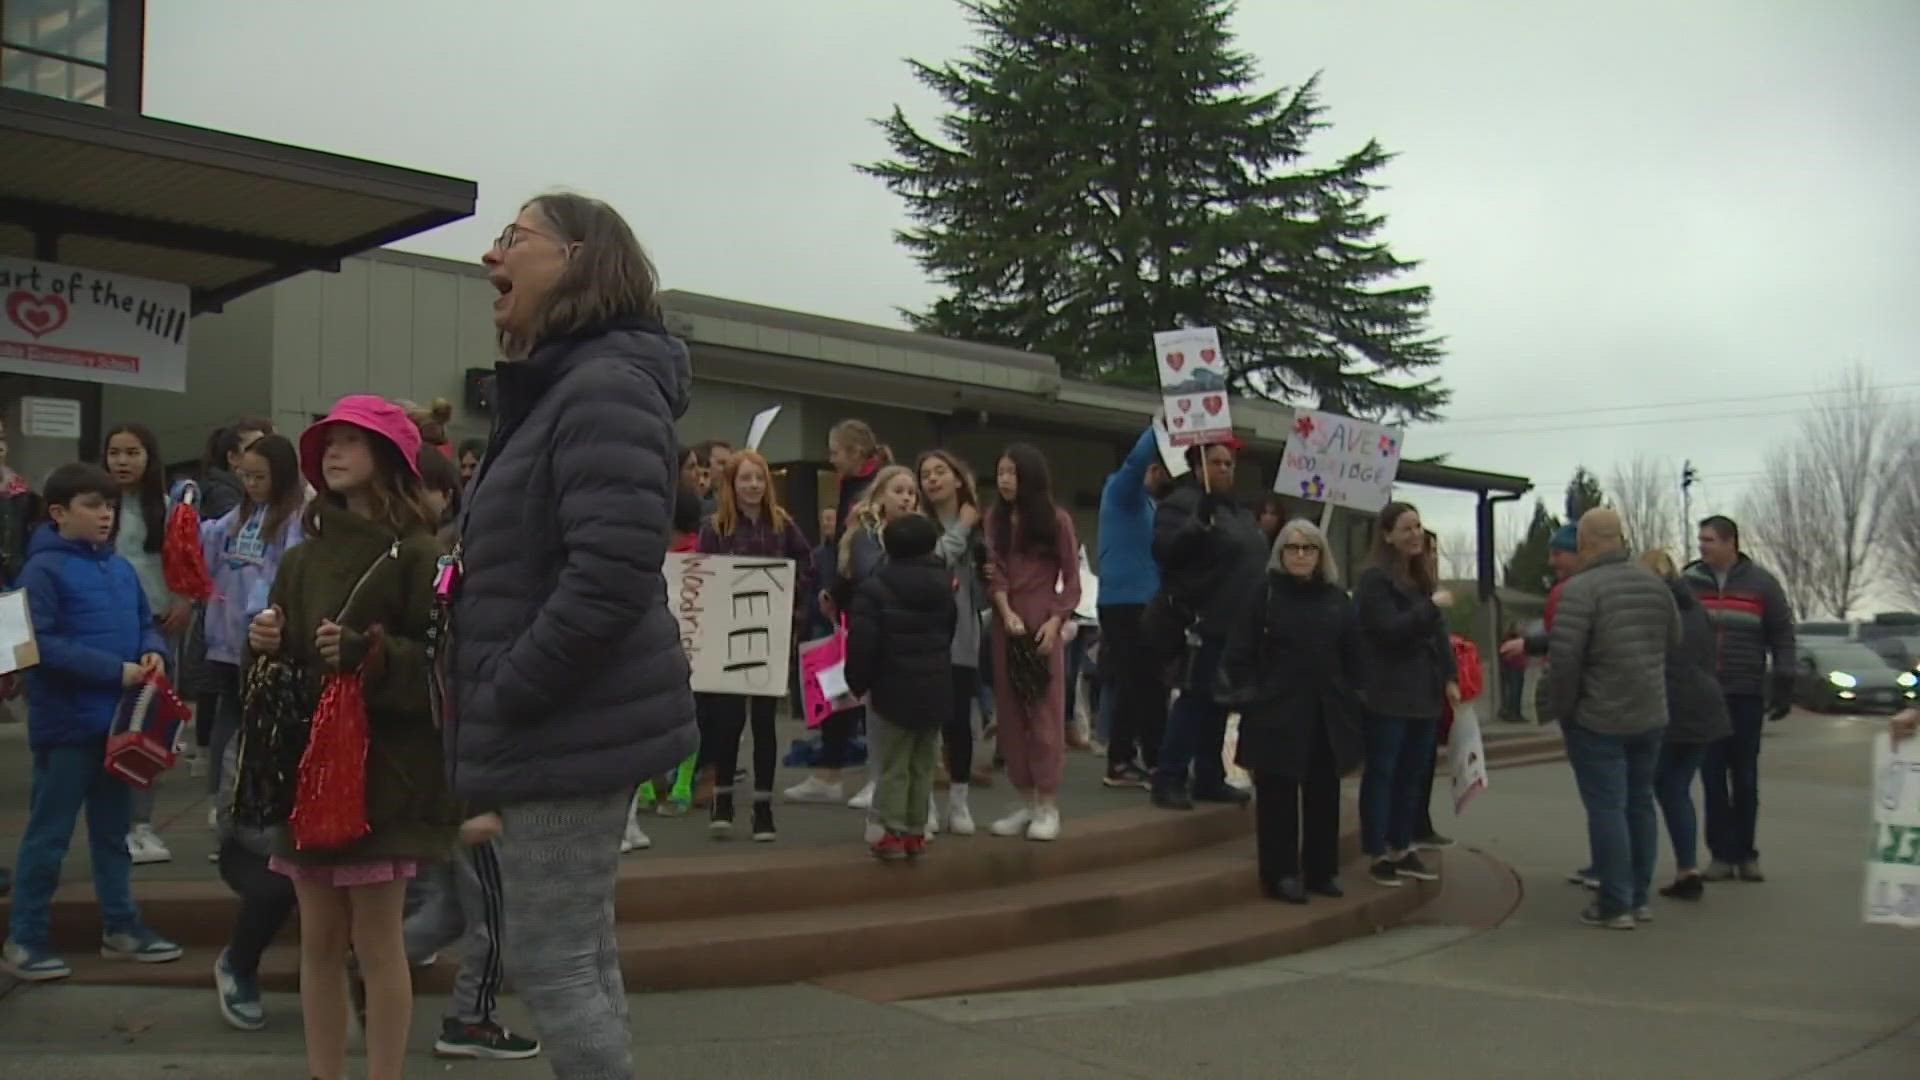 Gov. Jay Inslee is now weighing in on a controversial plan to consolidate three schools in Bellevue.